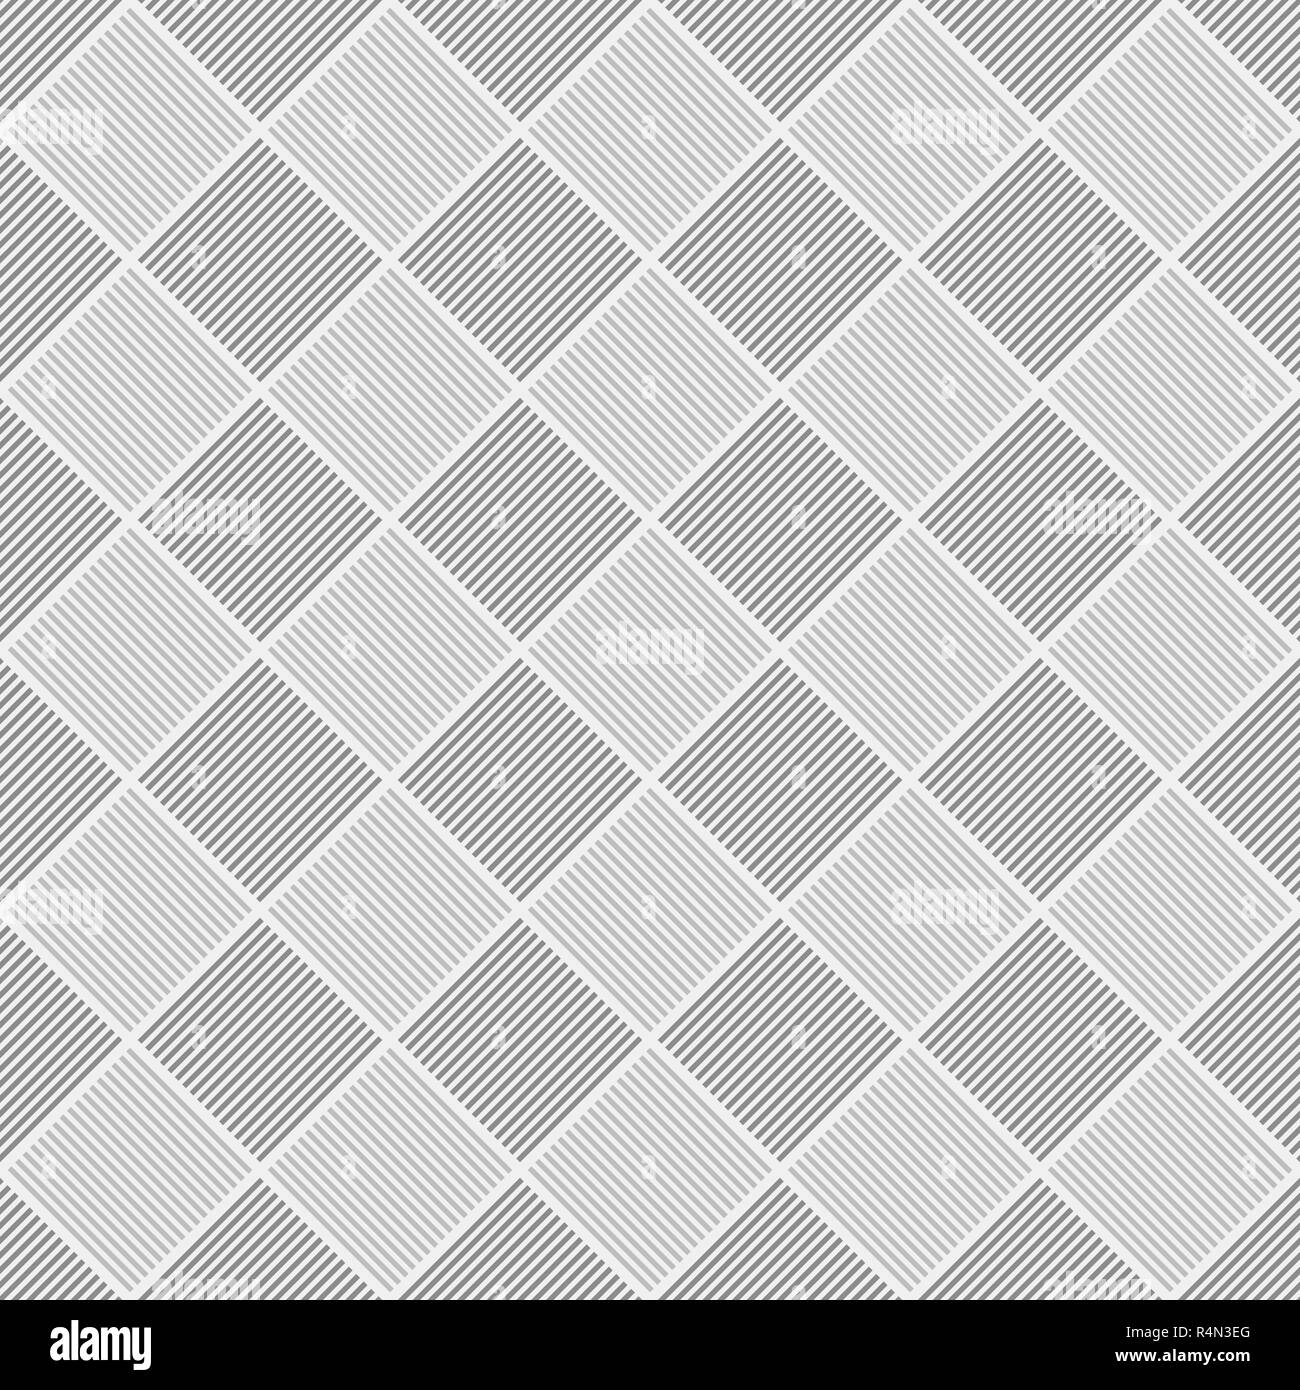 Geometrical repeating pattern - vector square design background Stock Vector